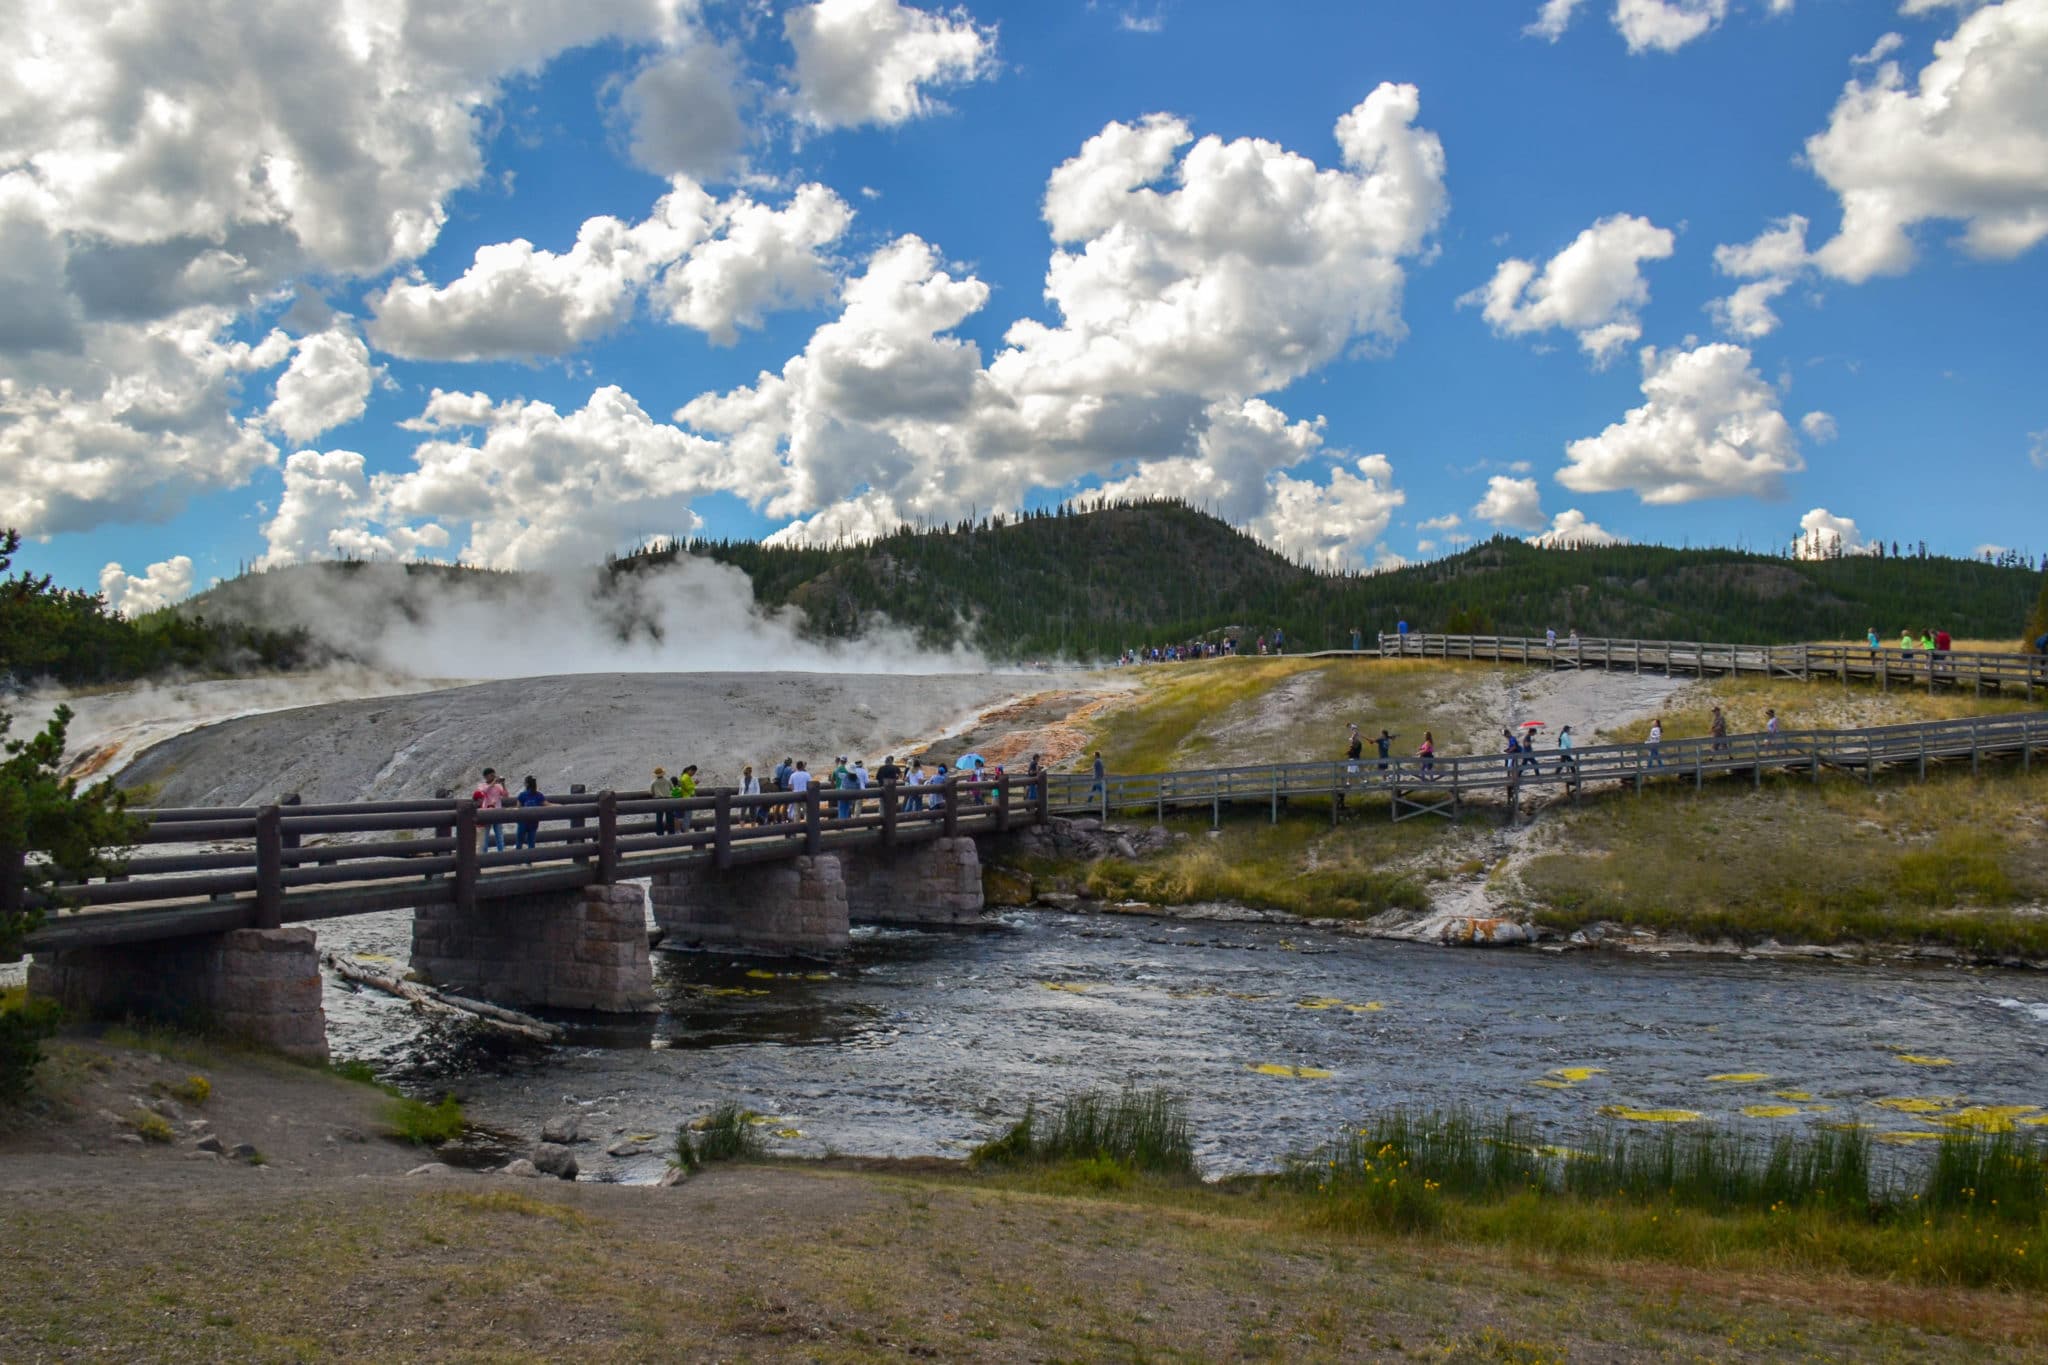 Bridge to Midway Geyser Basin and Grand Prismatic Spring